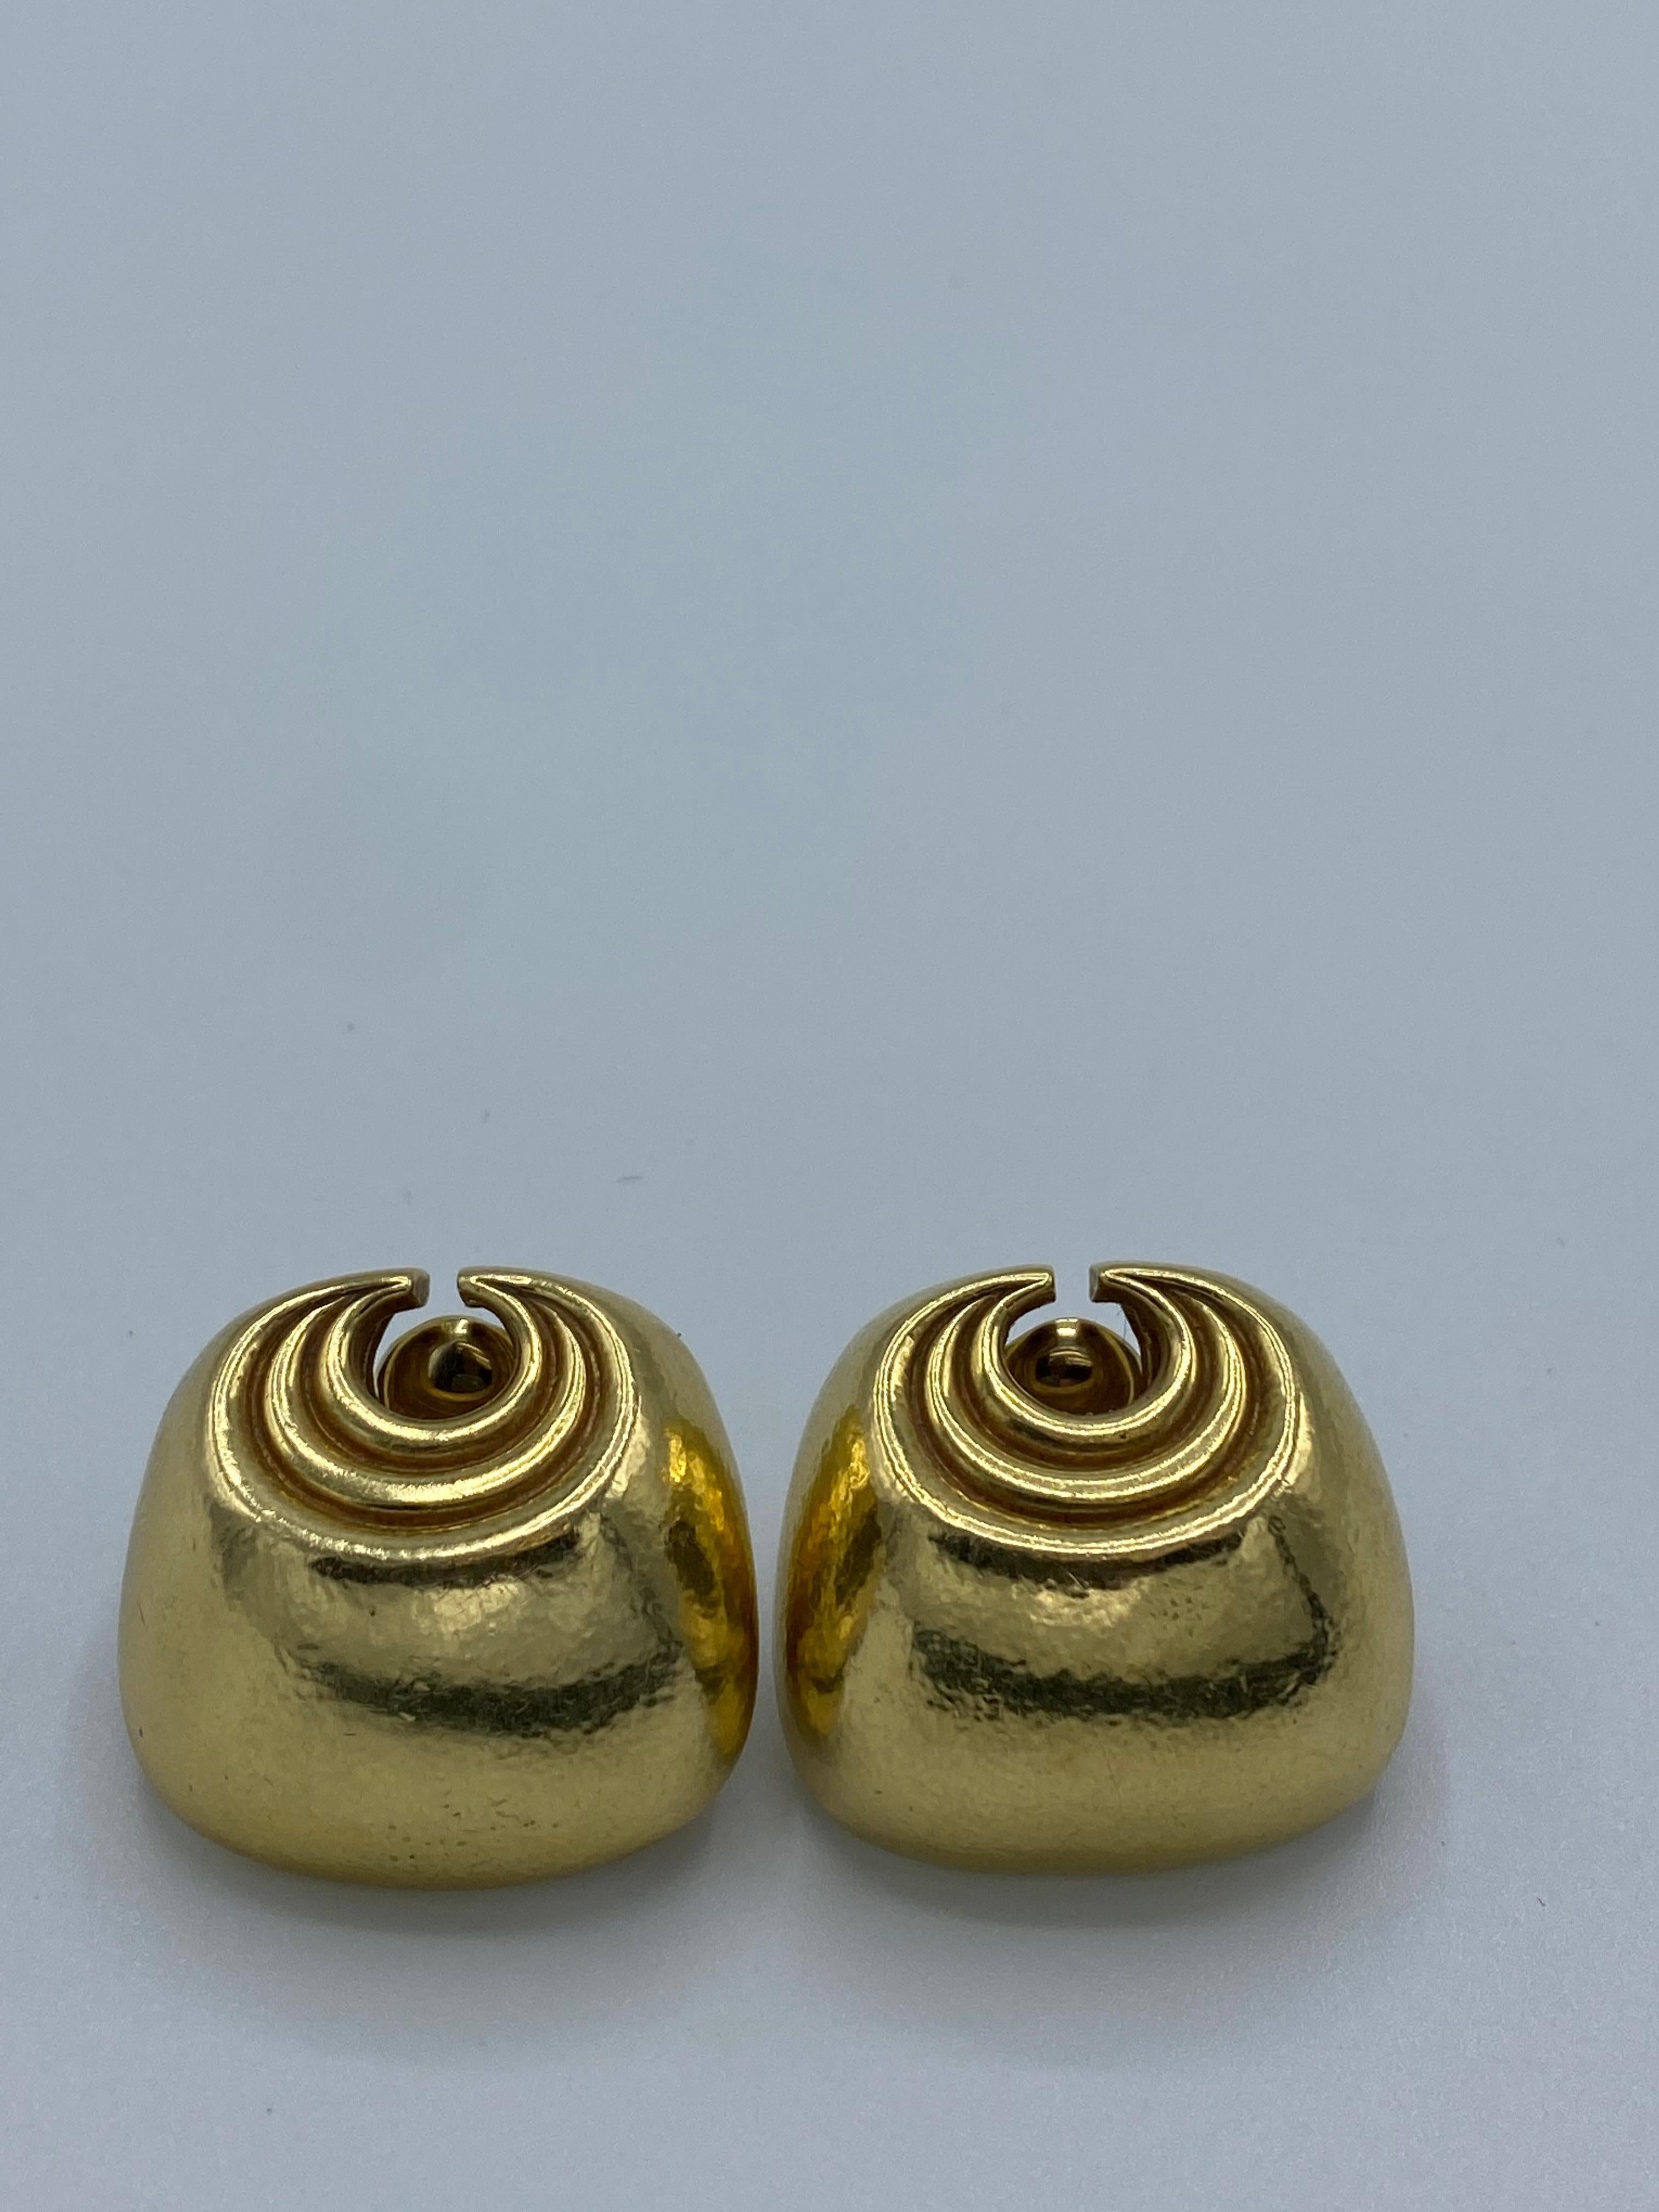 Product details:

The earrings are designed by David Webb in 1980's. It is made out of 18 karat yellow gold and it features hammered finish.
Total weight is 40.3 grams.
Measurements are 1.25 inch wide and 1.25 inch long.
It is signed WEBB and